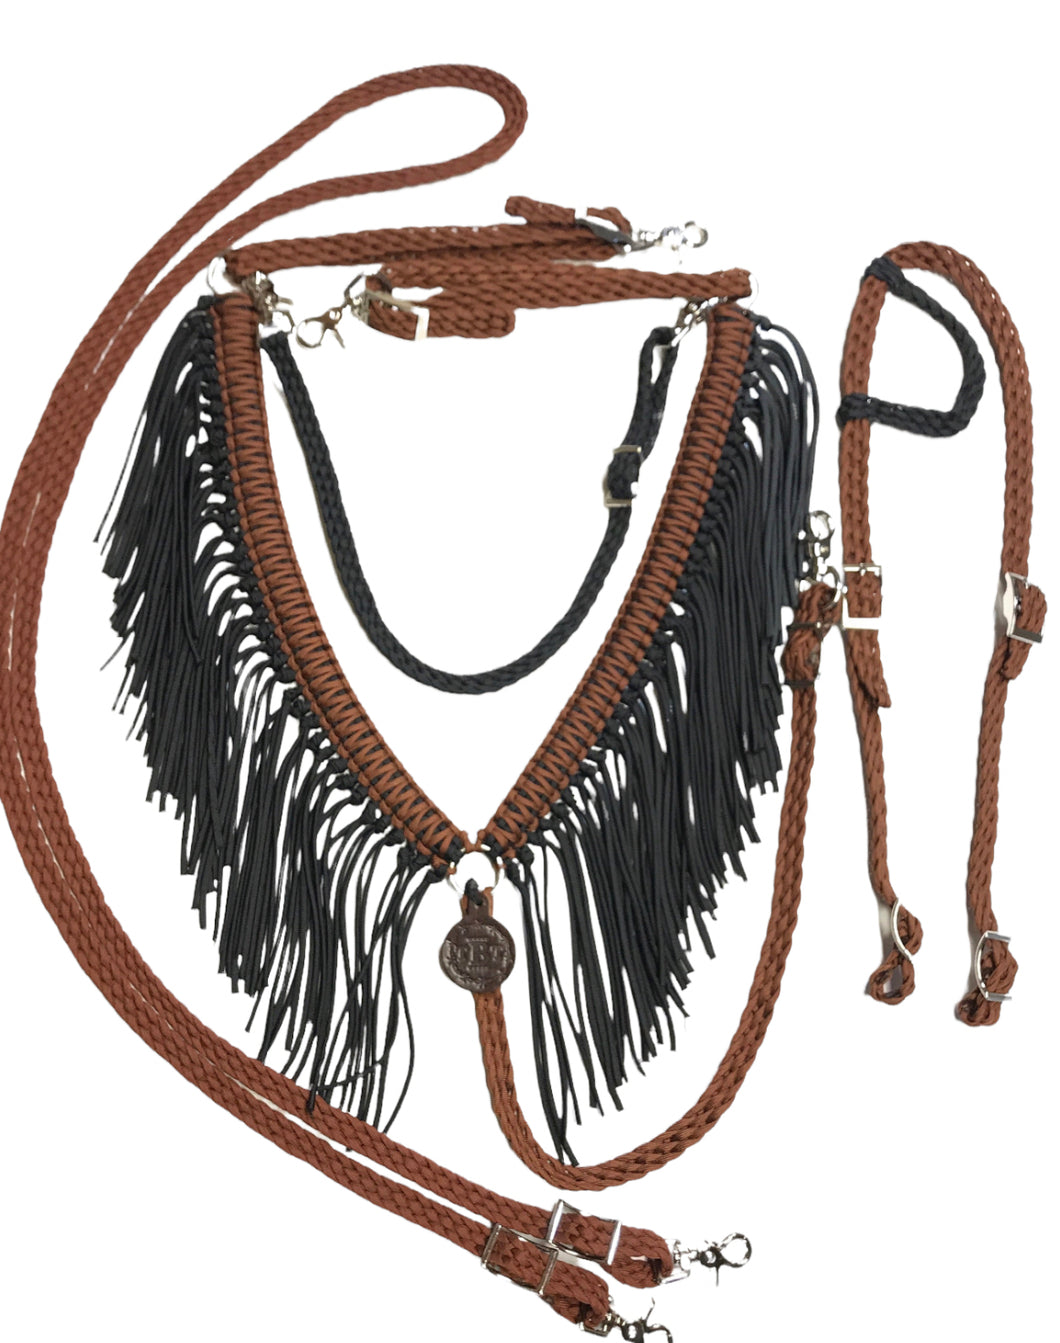 Fringe Breast Collar horse tack set Chocolate brown and Black